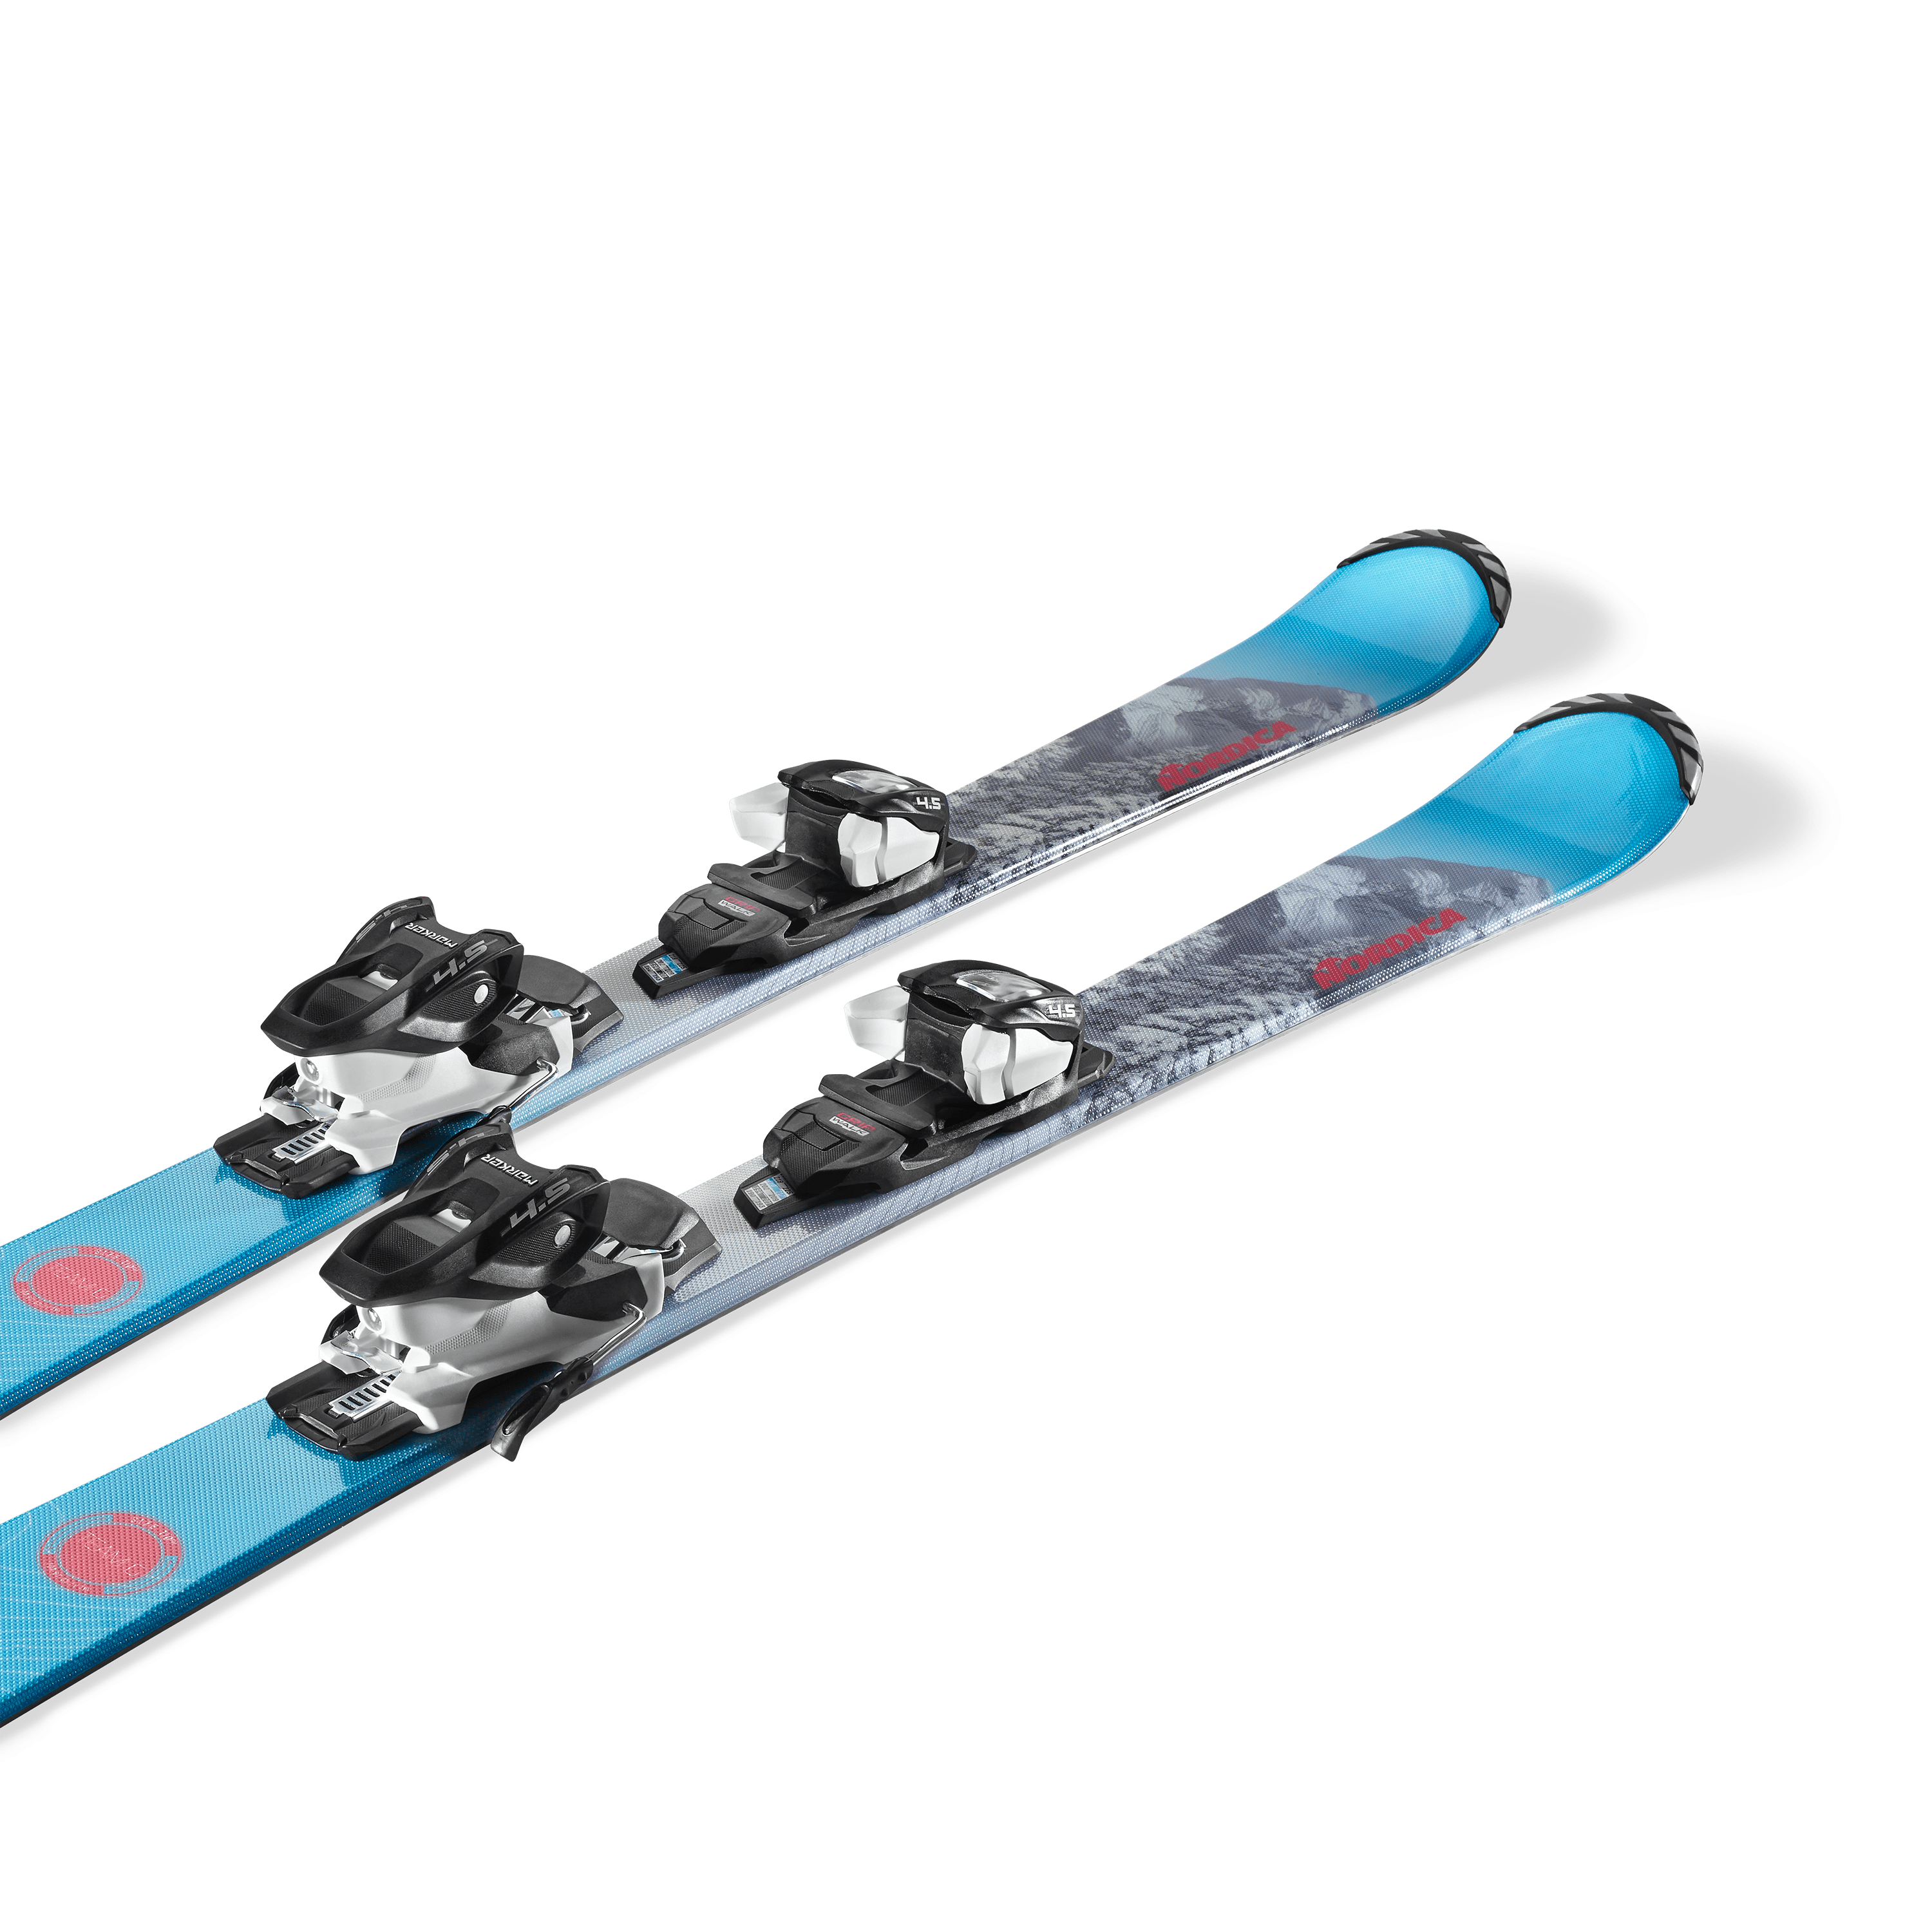 Picture of the Nordica Team g fdt (110-140) skis.